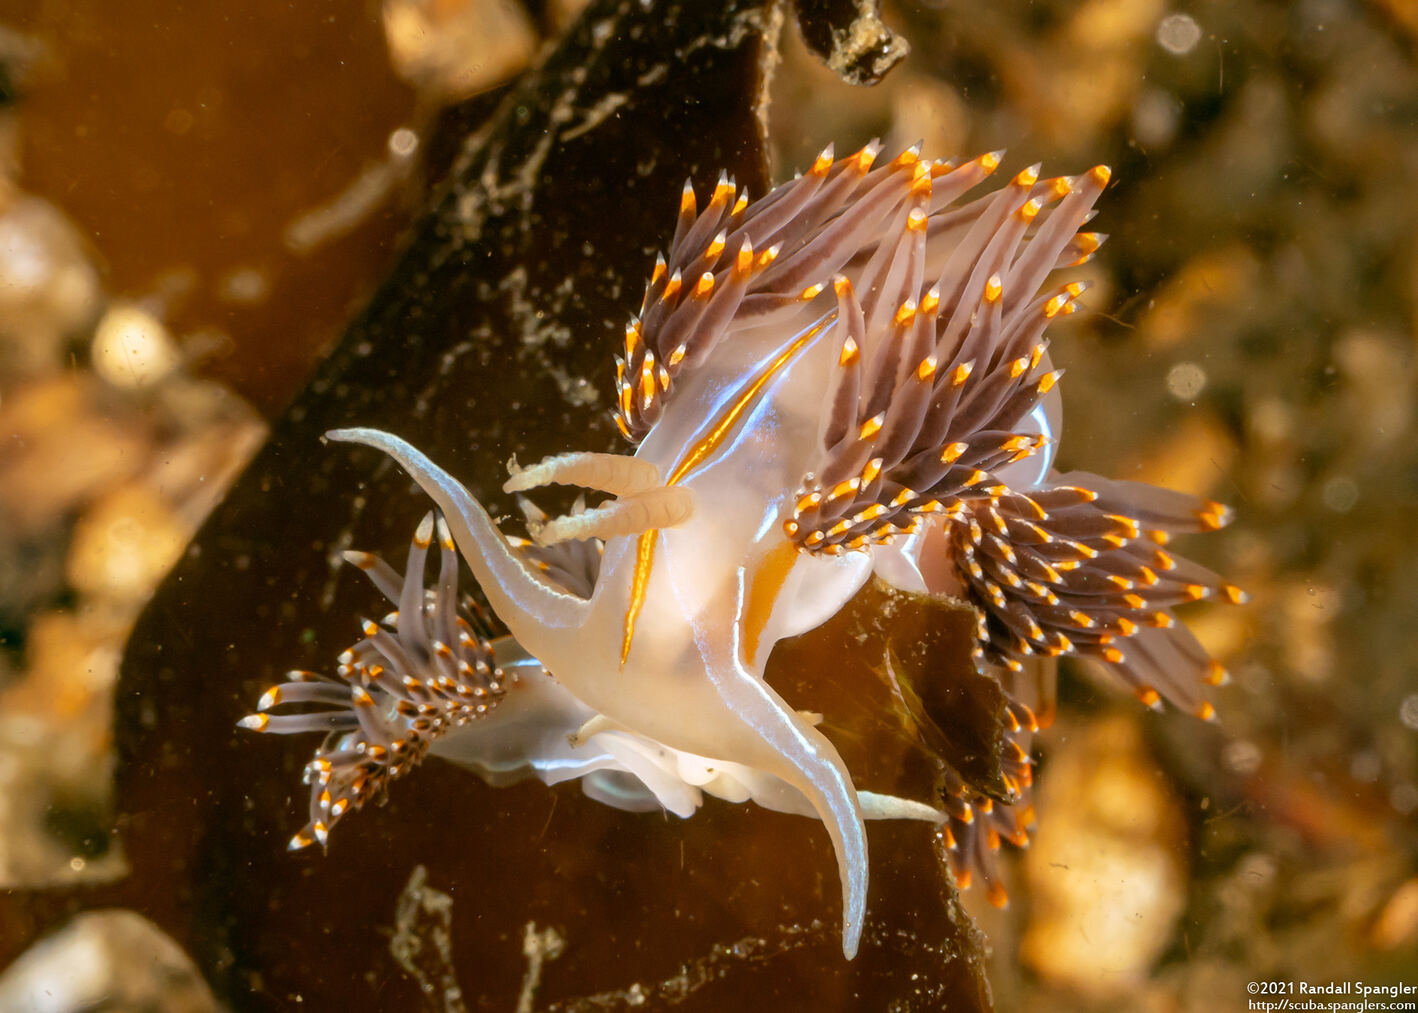 Hermissenda opalescens (Opalescent Nudibranch); Nudibranch eating a smaller one